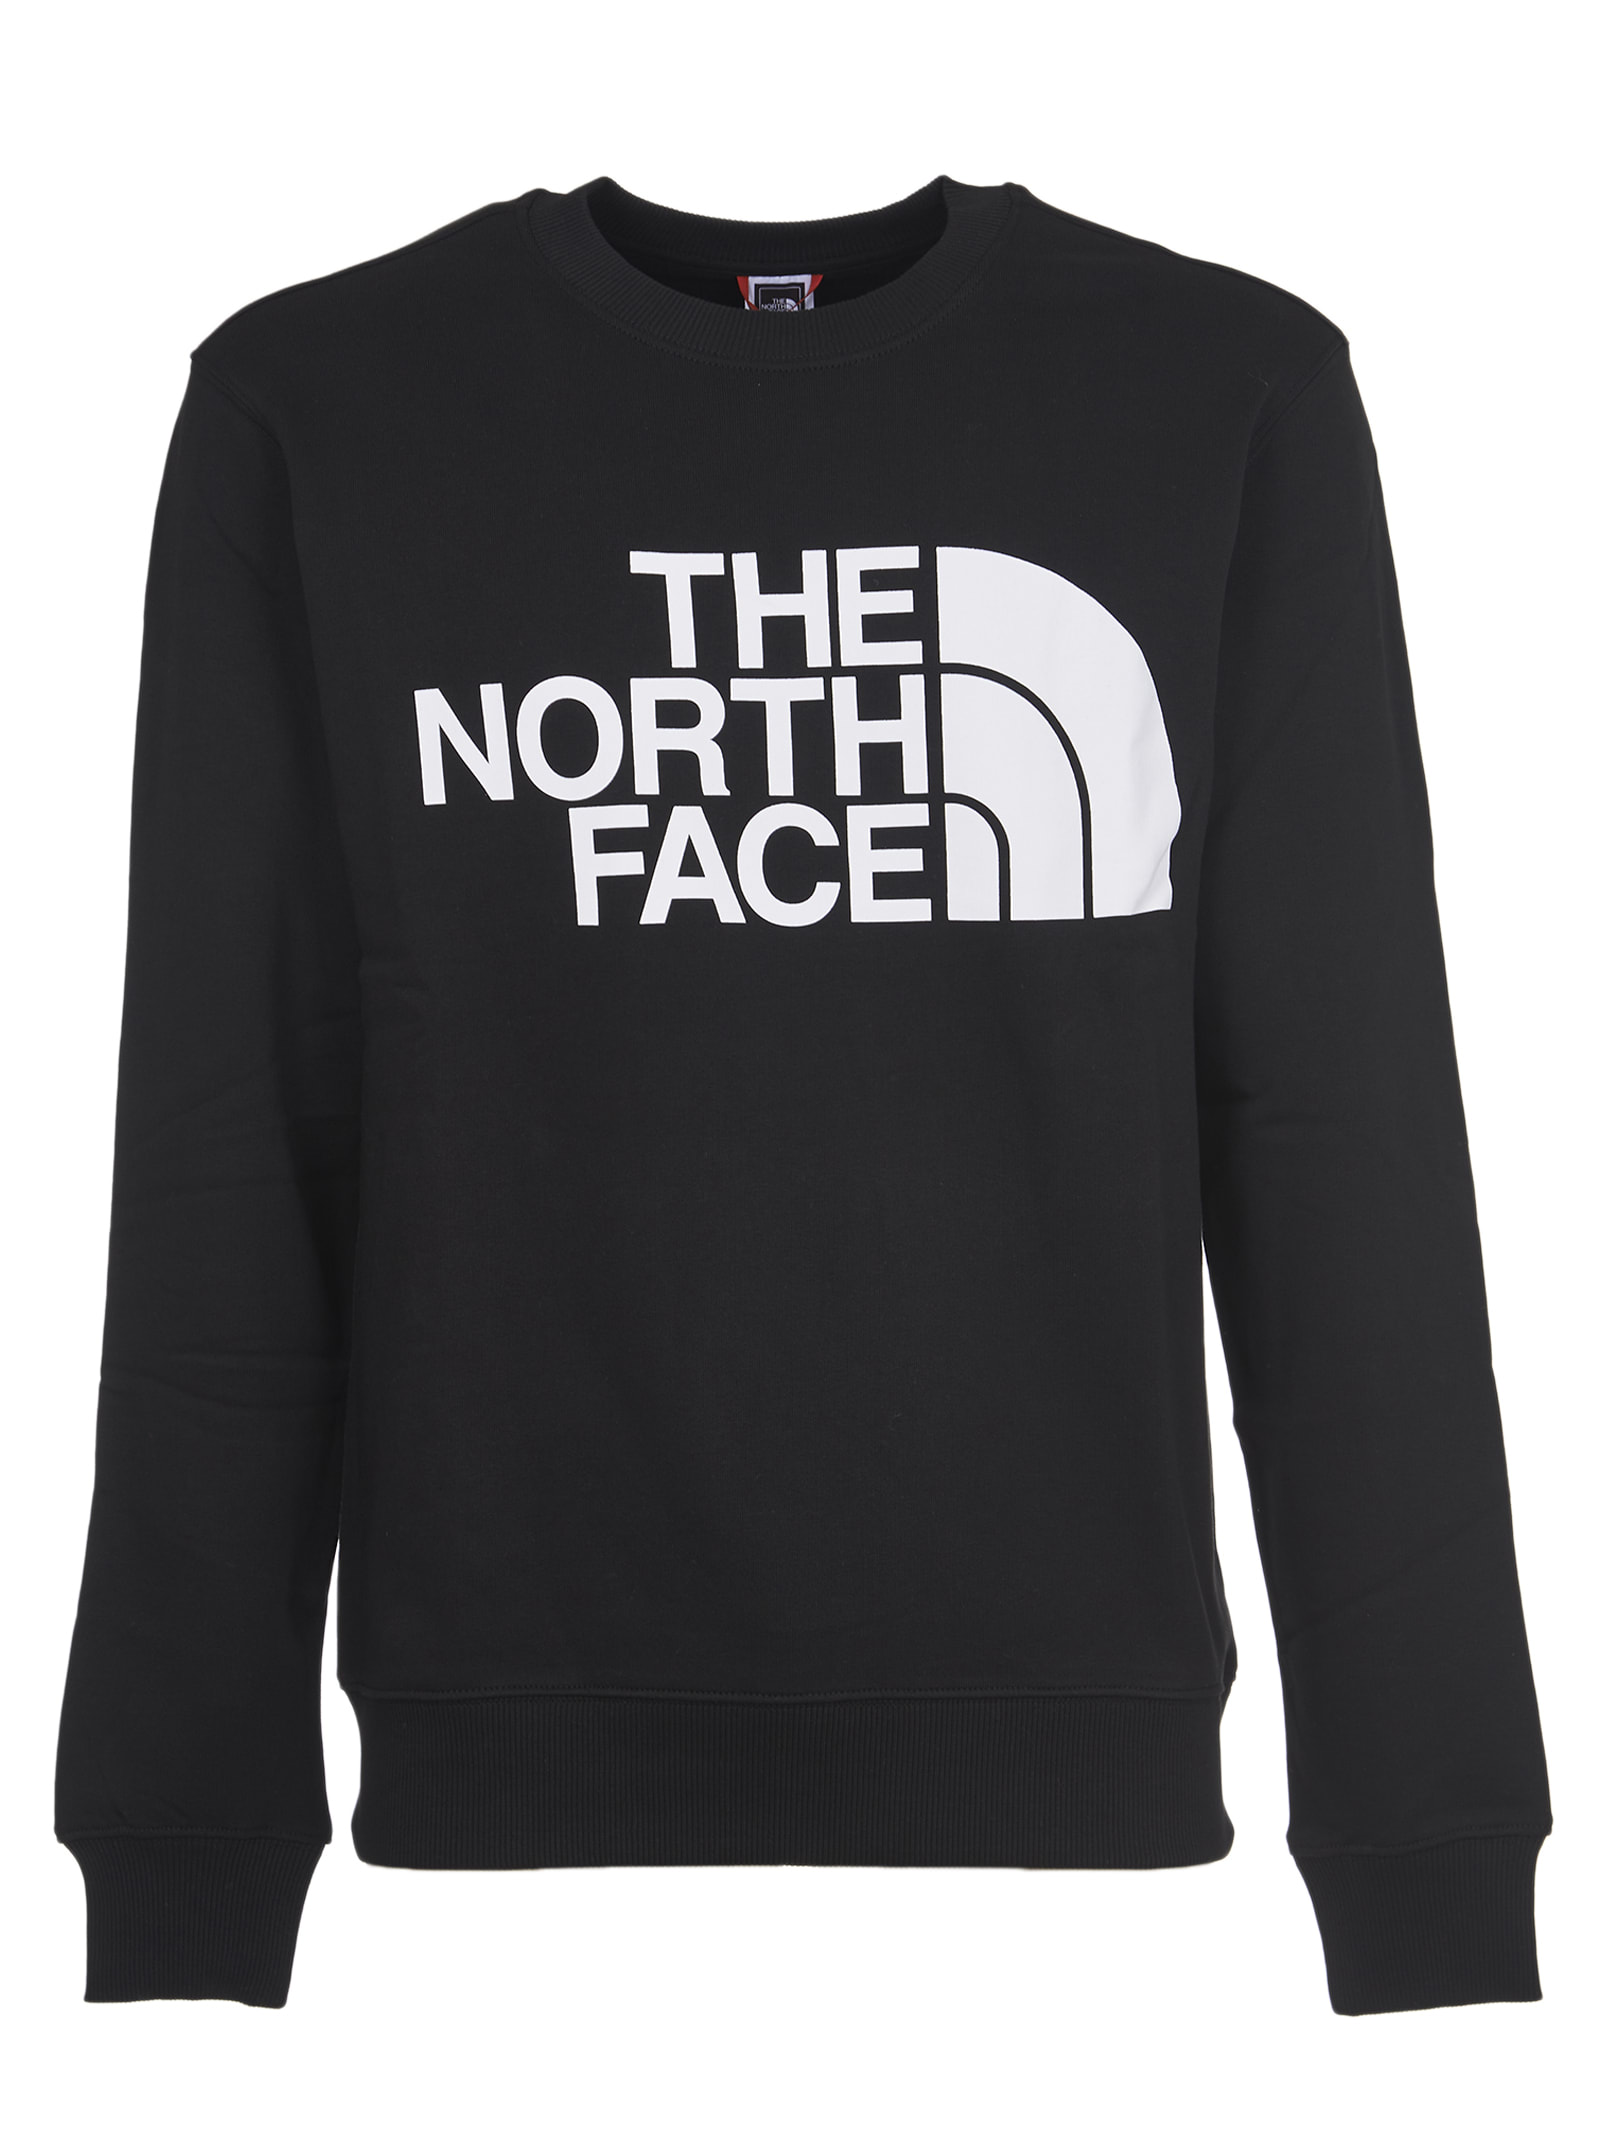 The North Face Black Crew With Logo